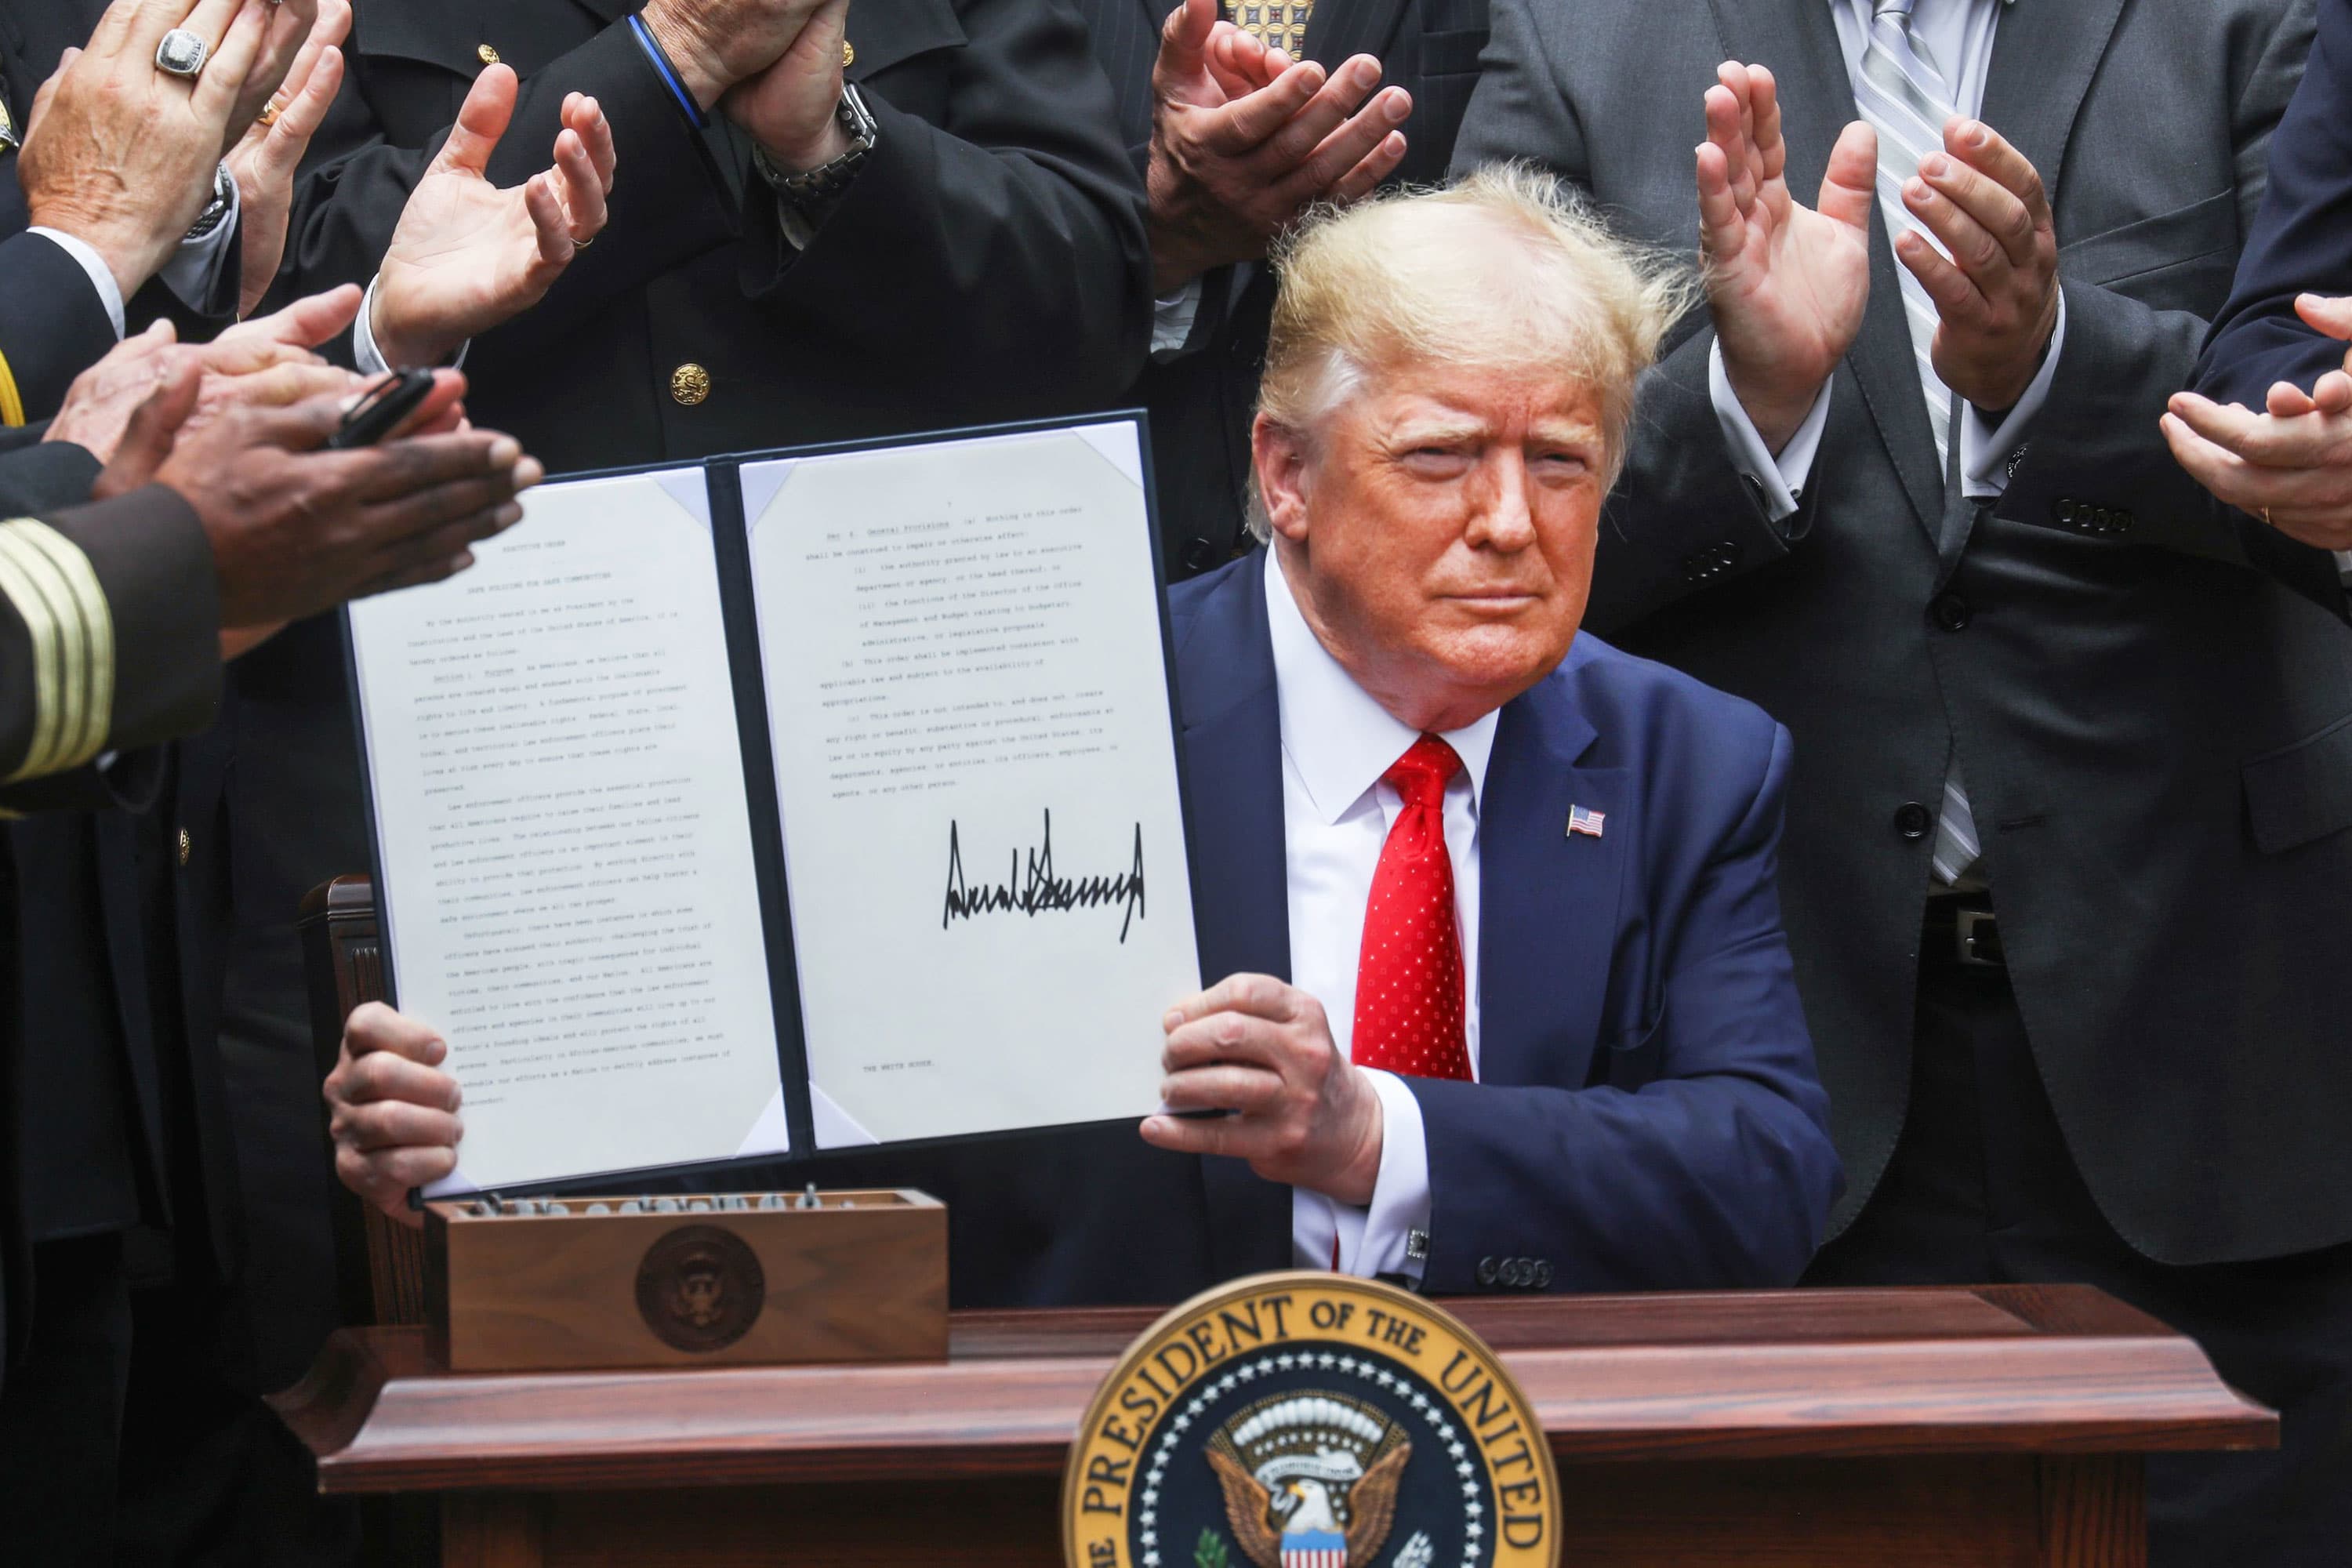 Trump signs executive order urging police reform, says cops need more funding